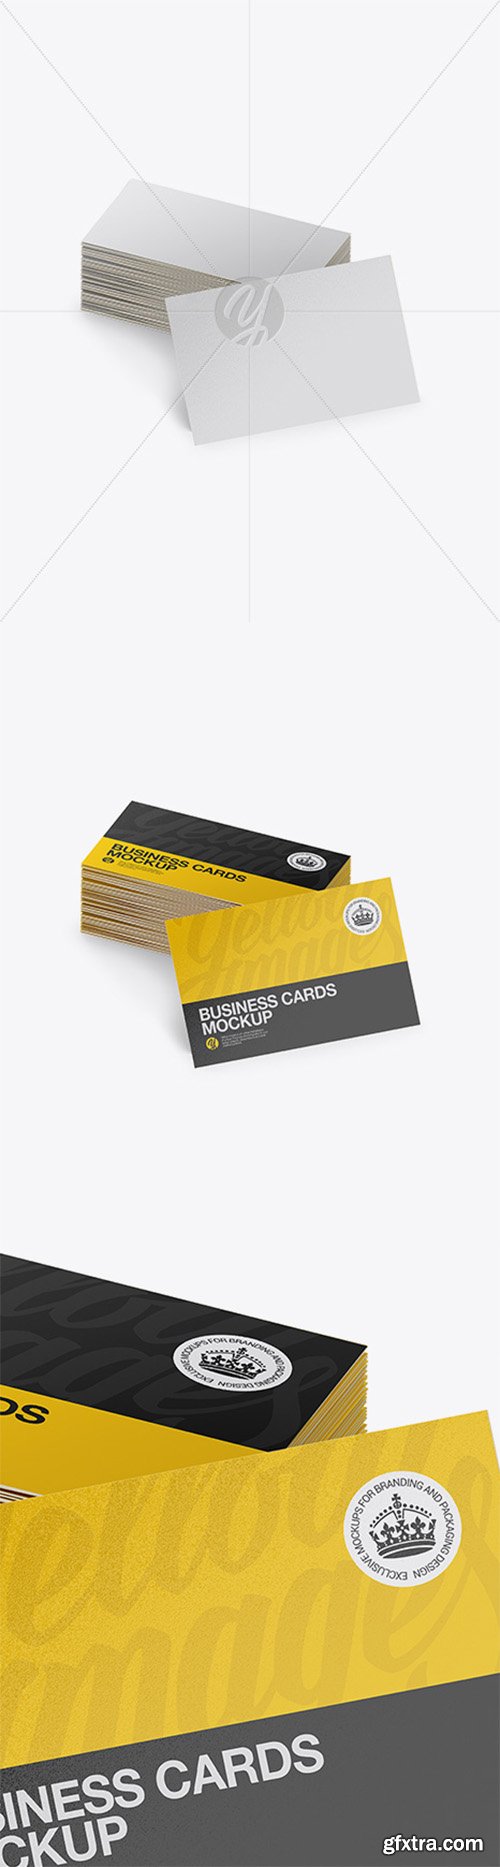 Stack of Textured Business Cards Mockup 20222